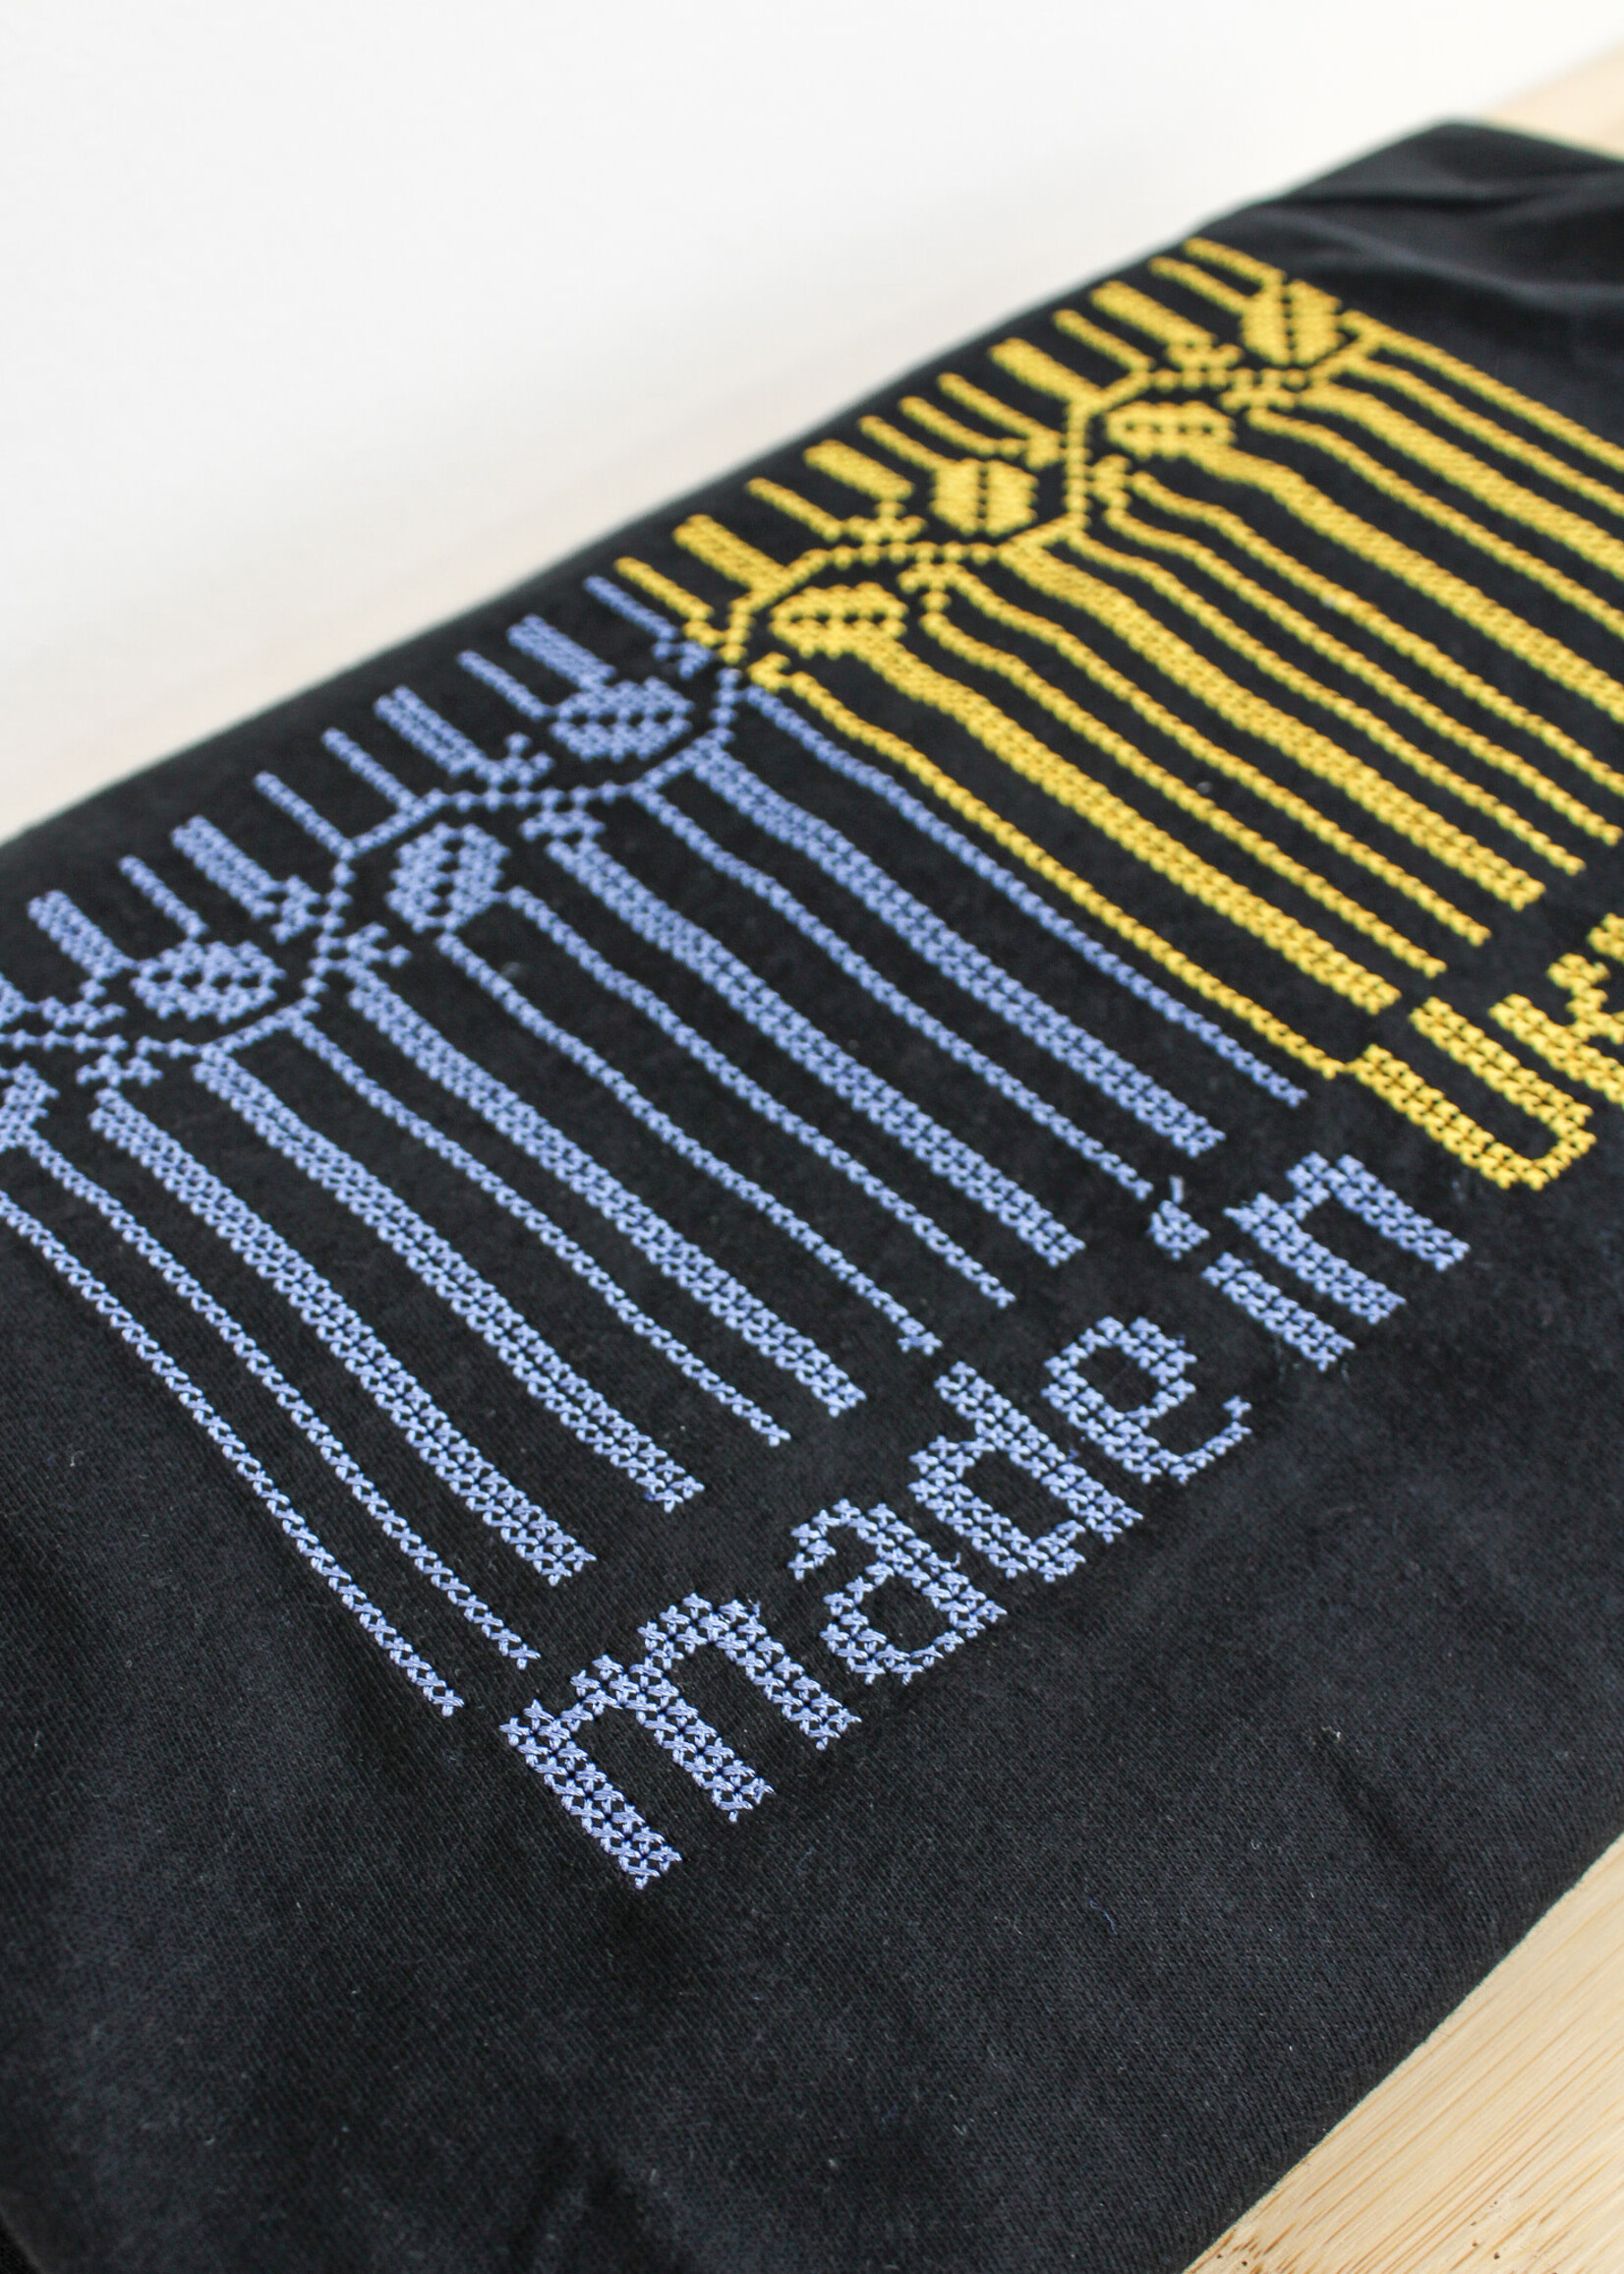 APPAREL -T- SHIRT - (M) Black "Made in Ukraine" with Blue/Yellow Stitching